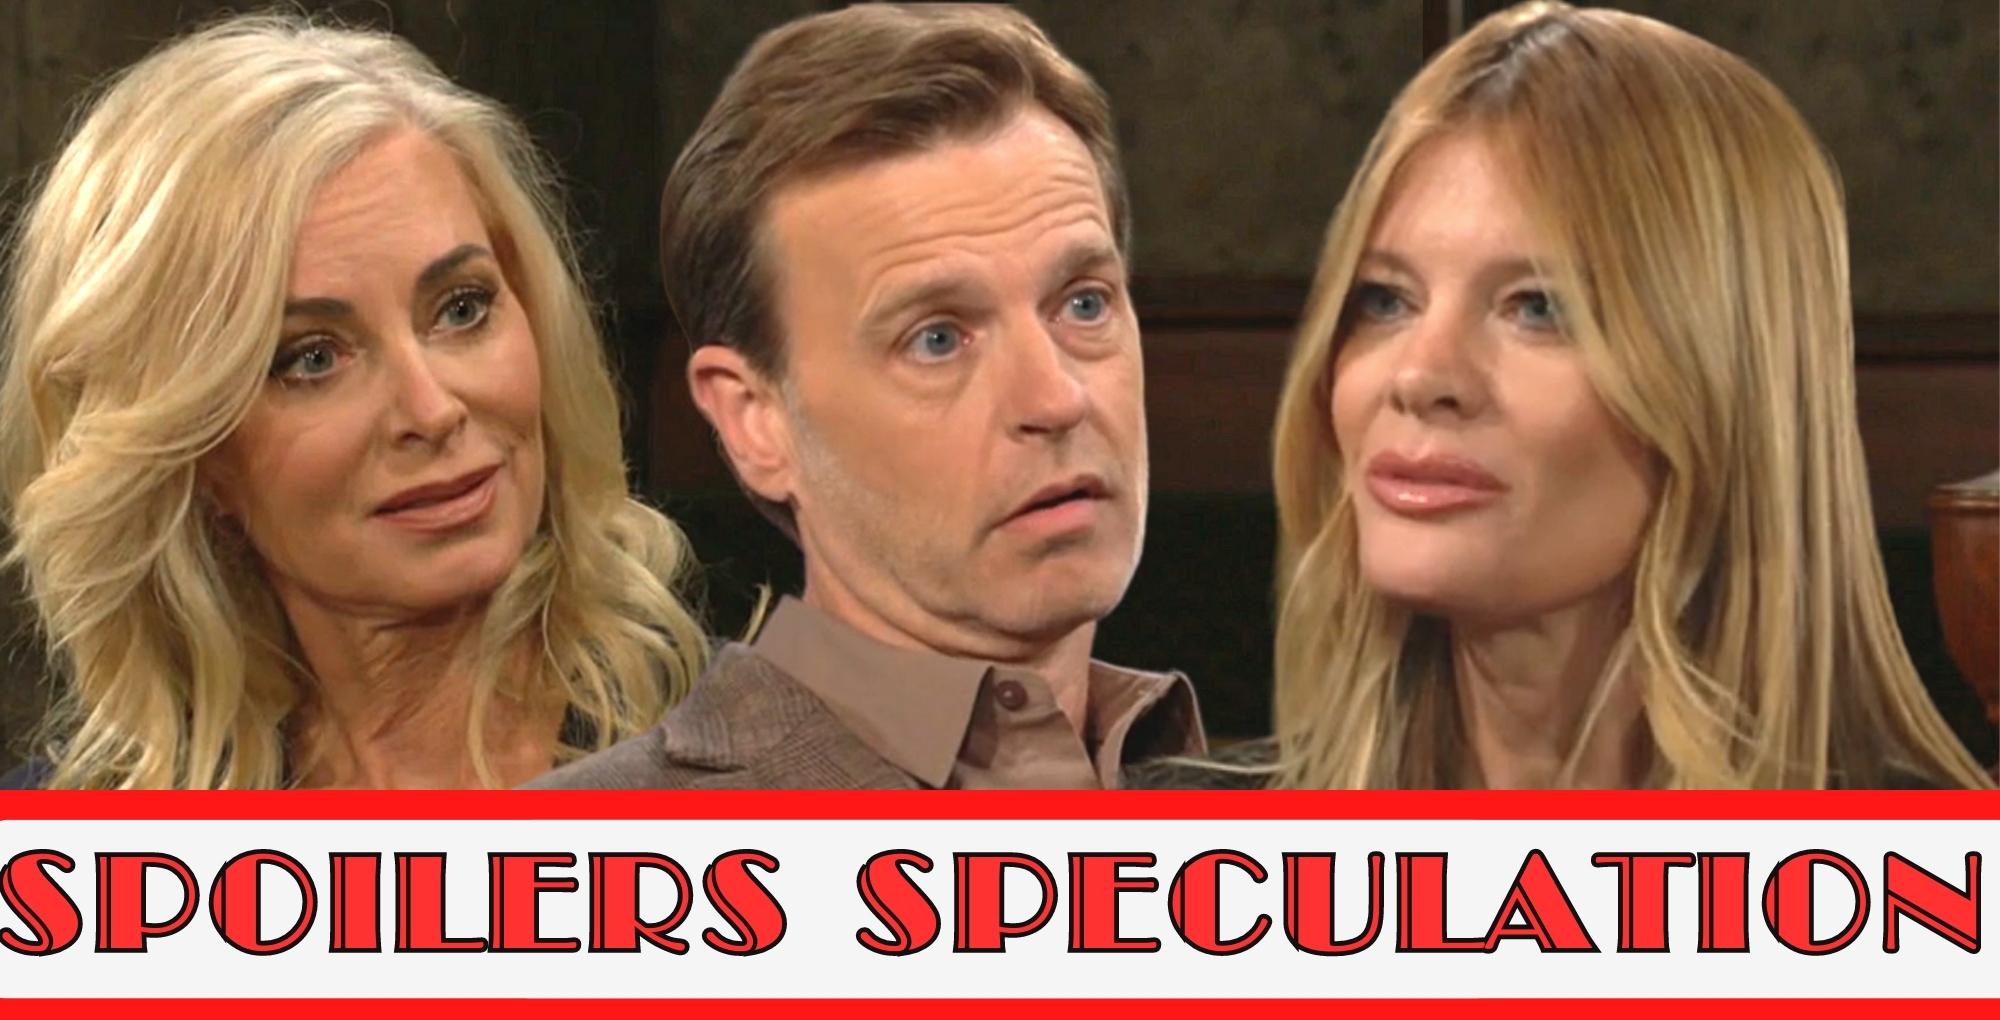 y&r spoilers speculation with ashley, tucker, and phyllis.